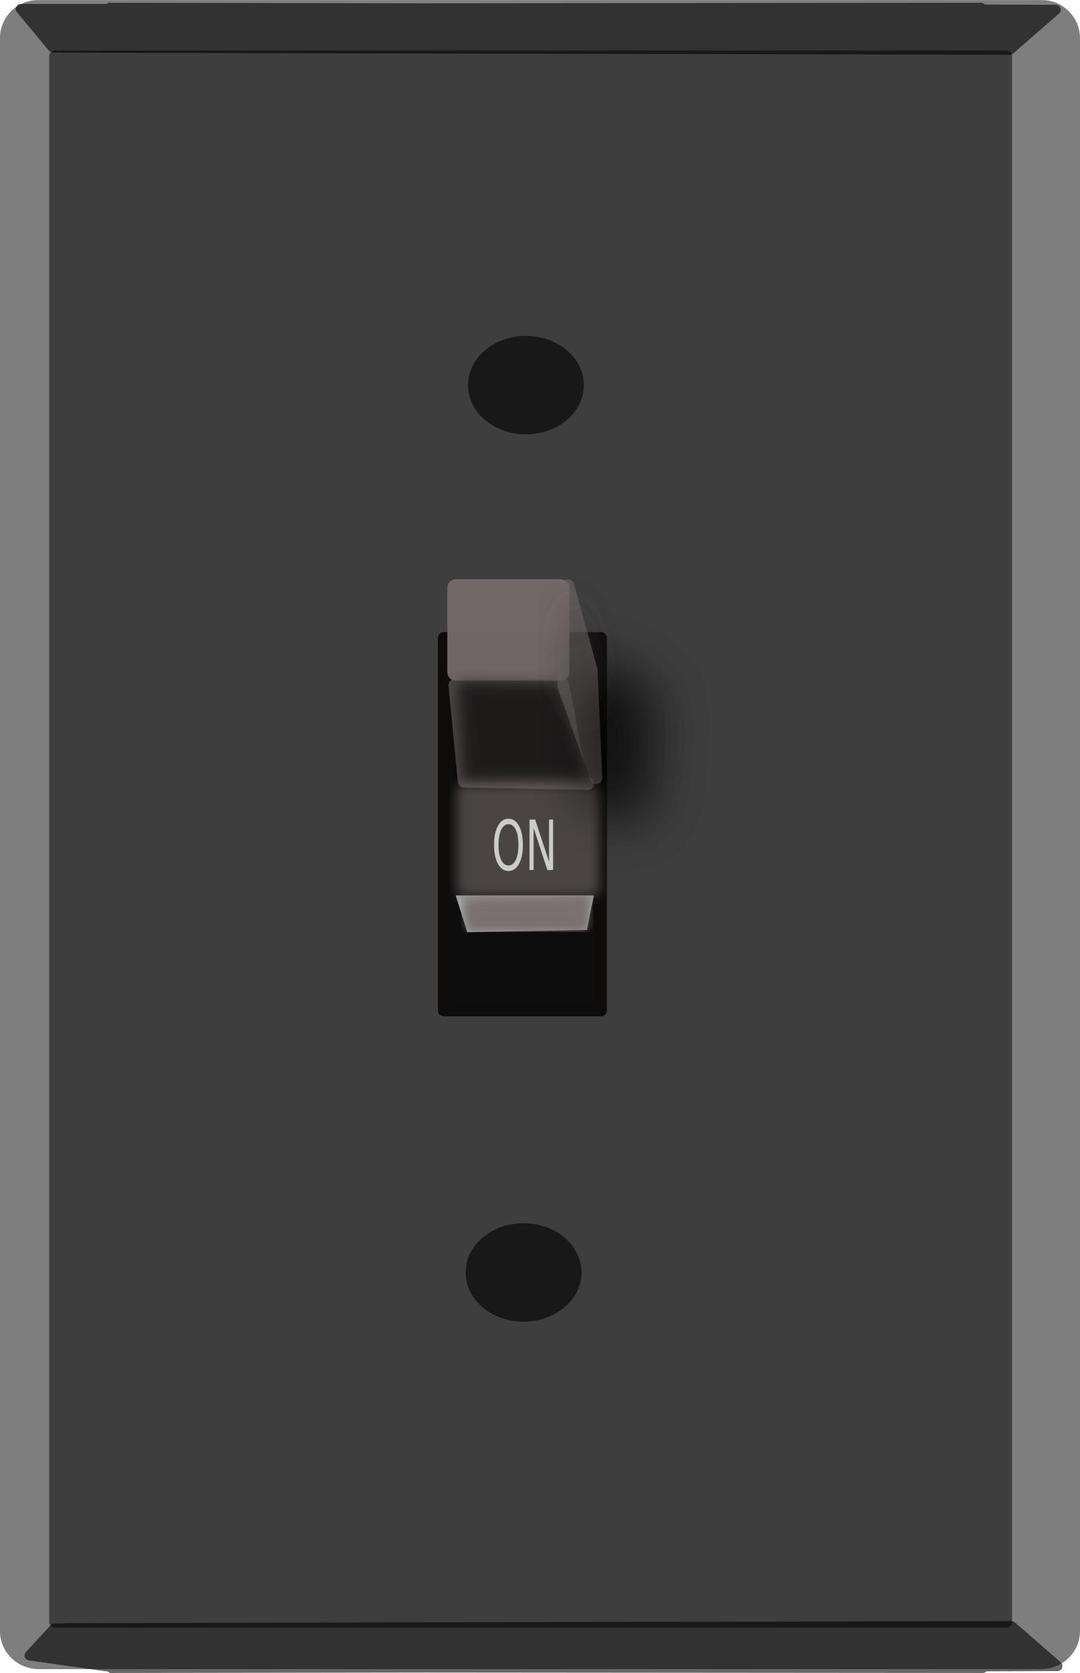 Light switch on png transparent